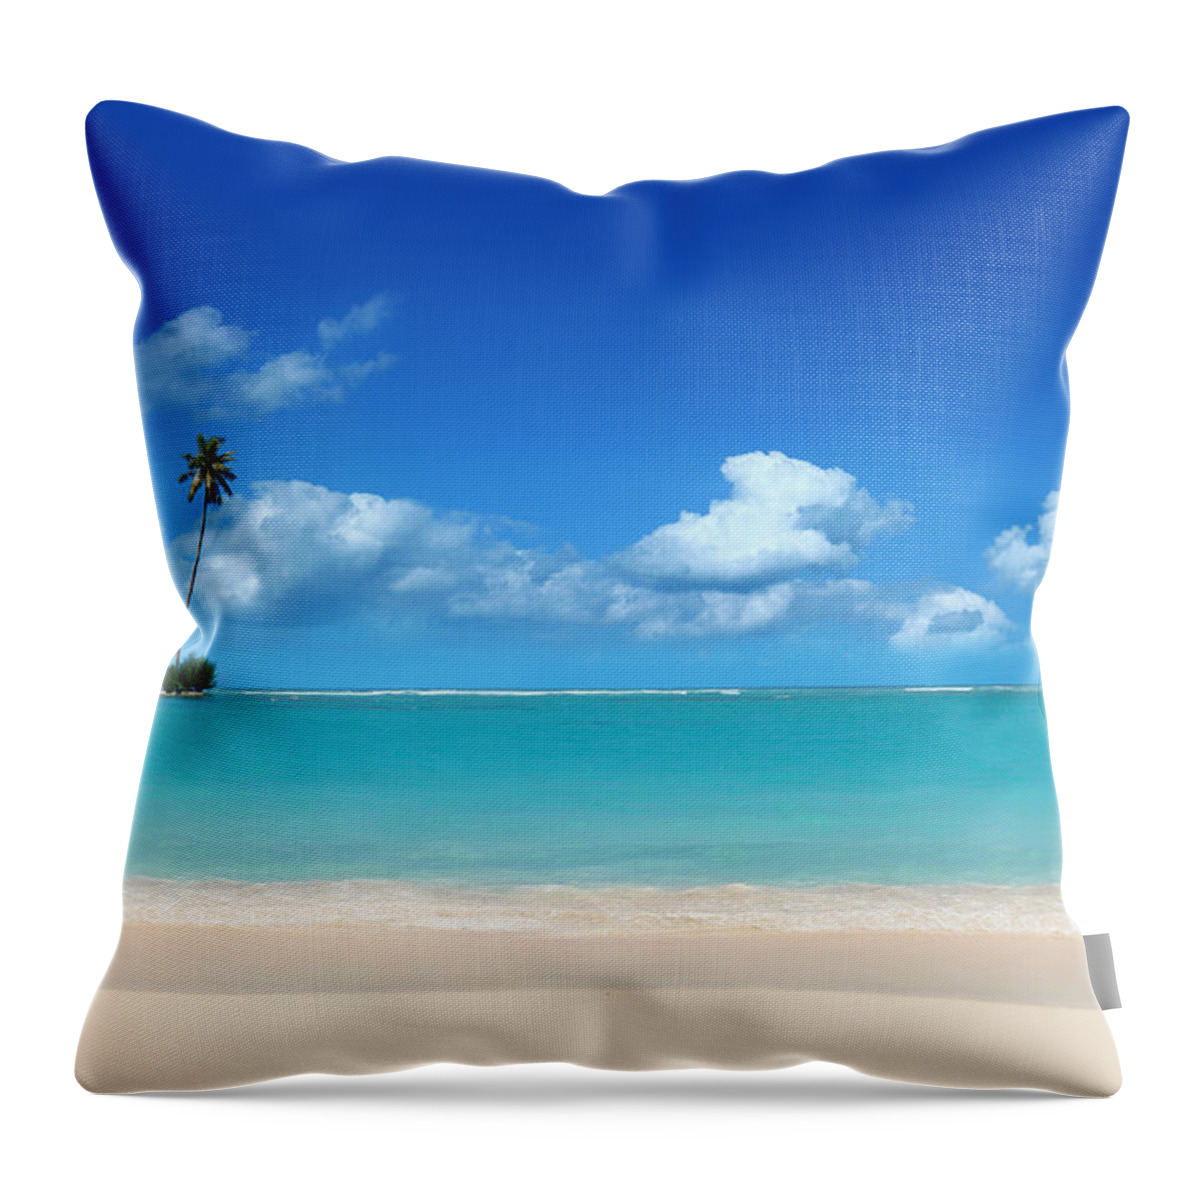 Tropical Tree Throw Pillow featuring the photograph Sand Beach And Small Tropical Island by Narvikk